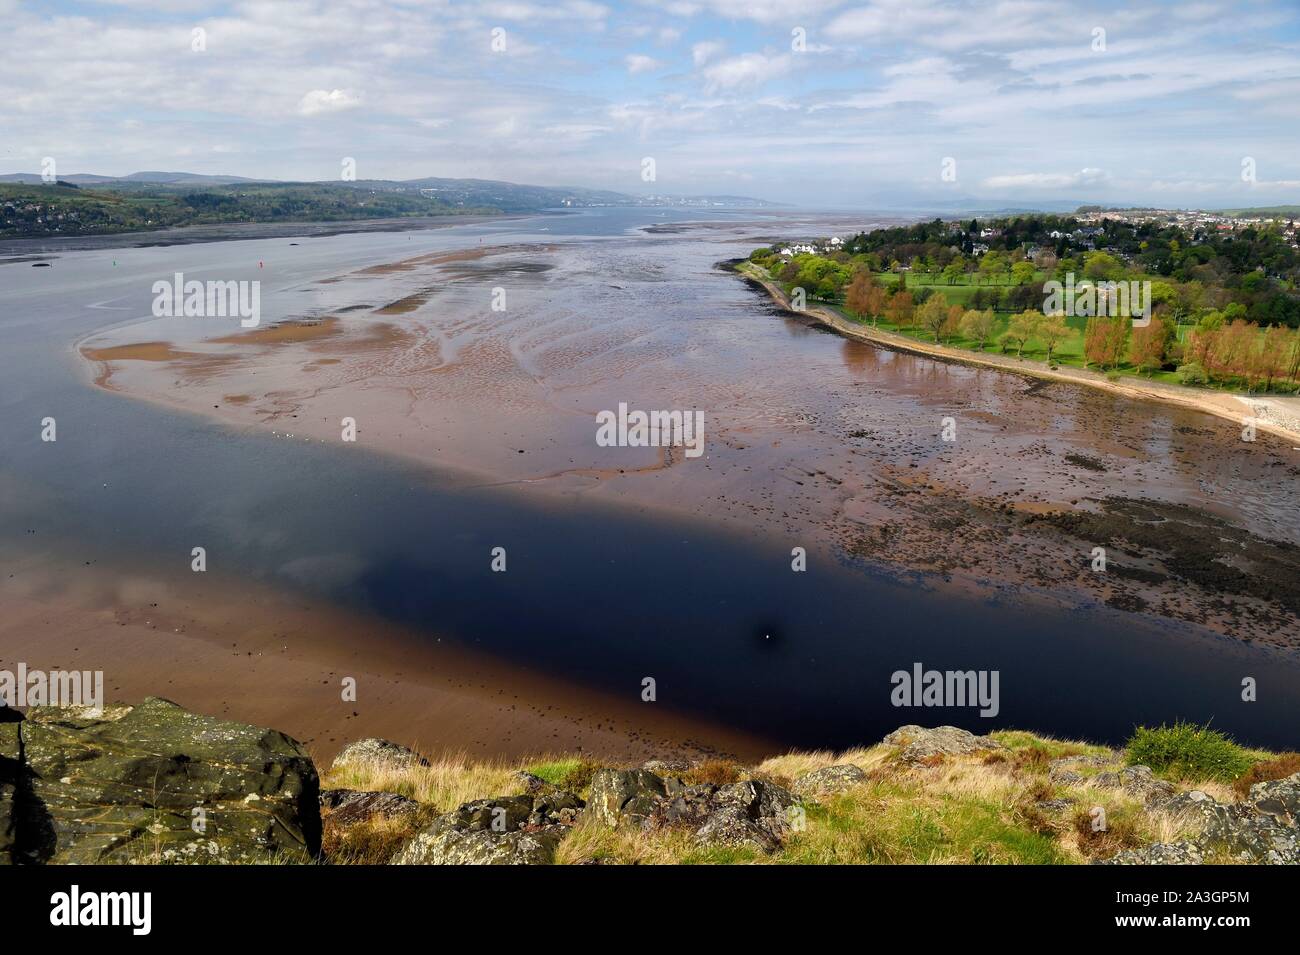 United Kingdom, Scotland, Highland, Dumbarton, the Clyde river at low tide seen from Dumbarton Castle Stock Photo